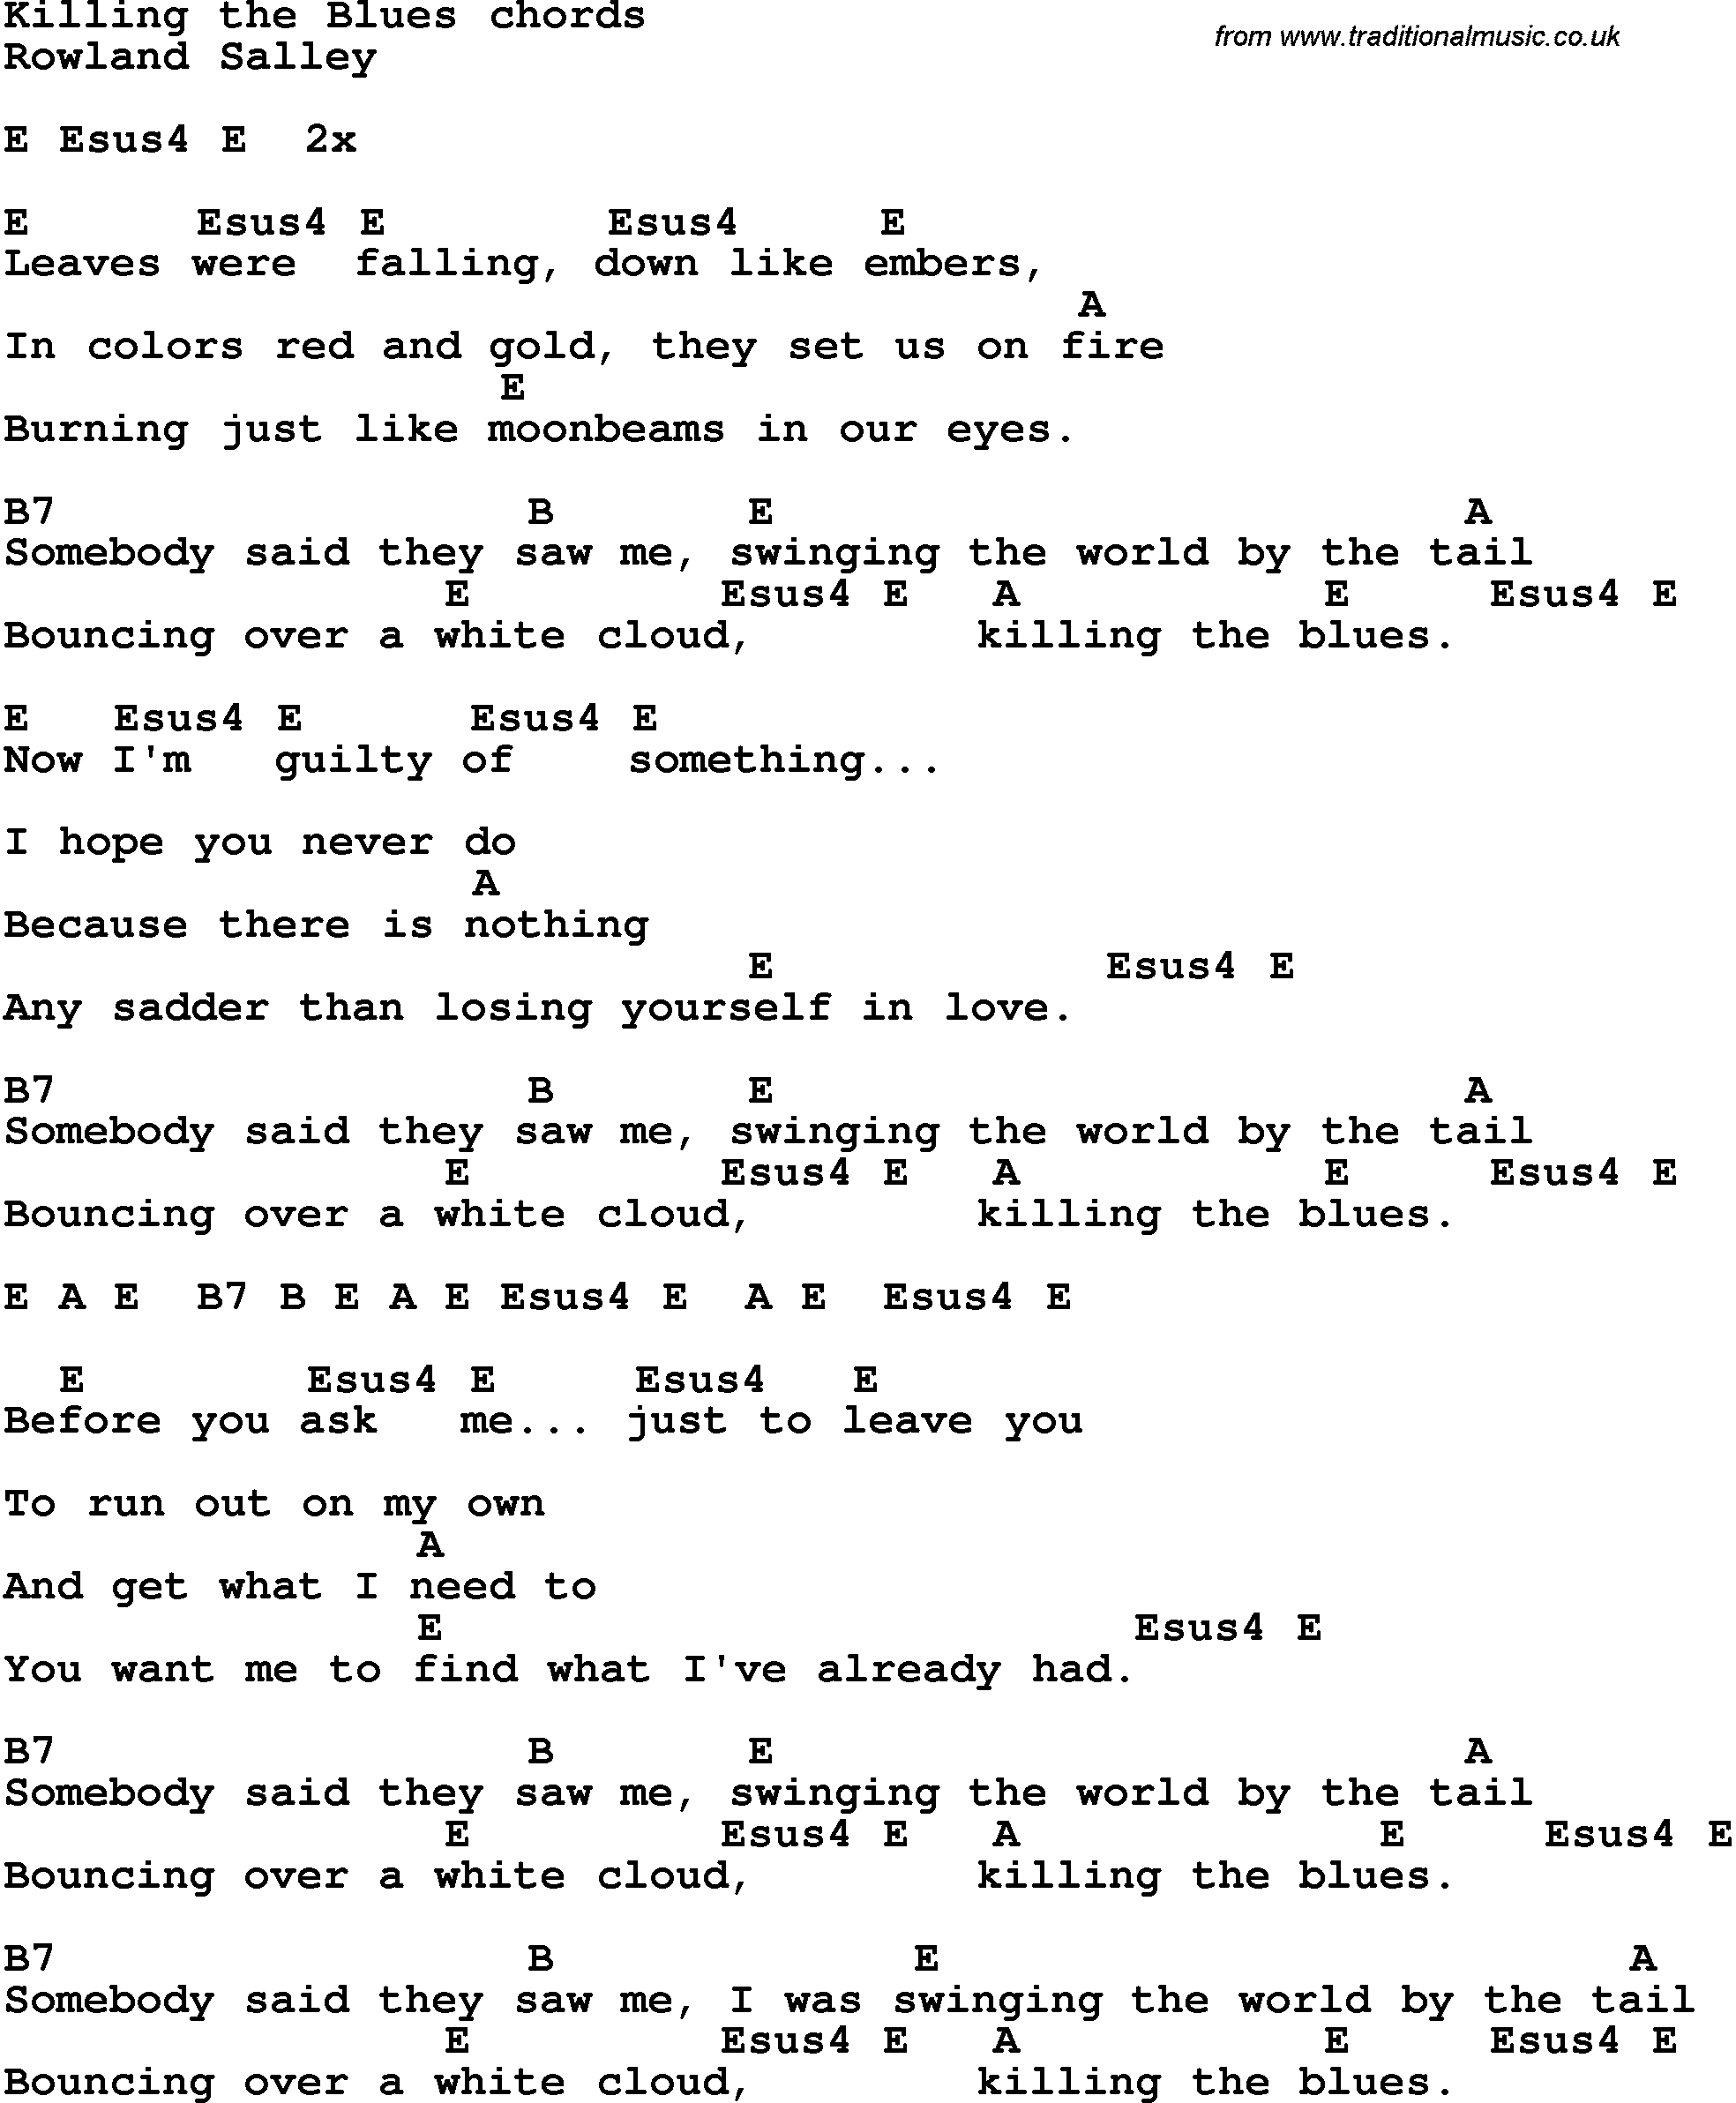 Song Lyrics with guitar chords for Killing The Blues